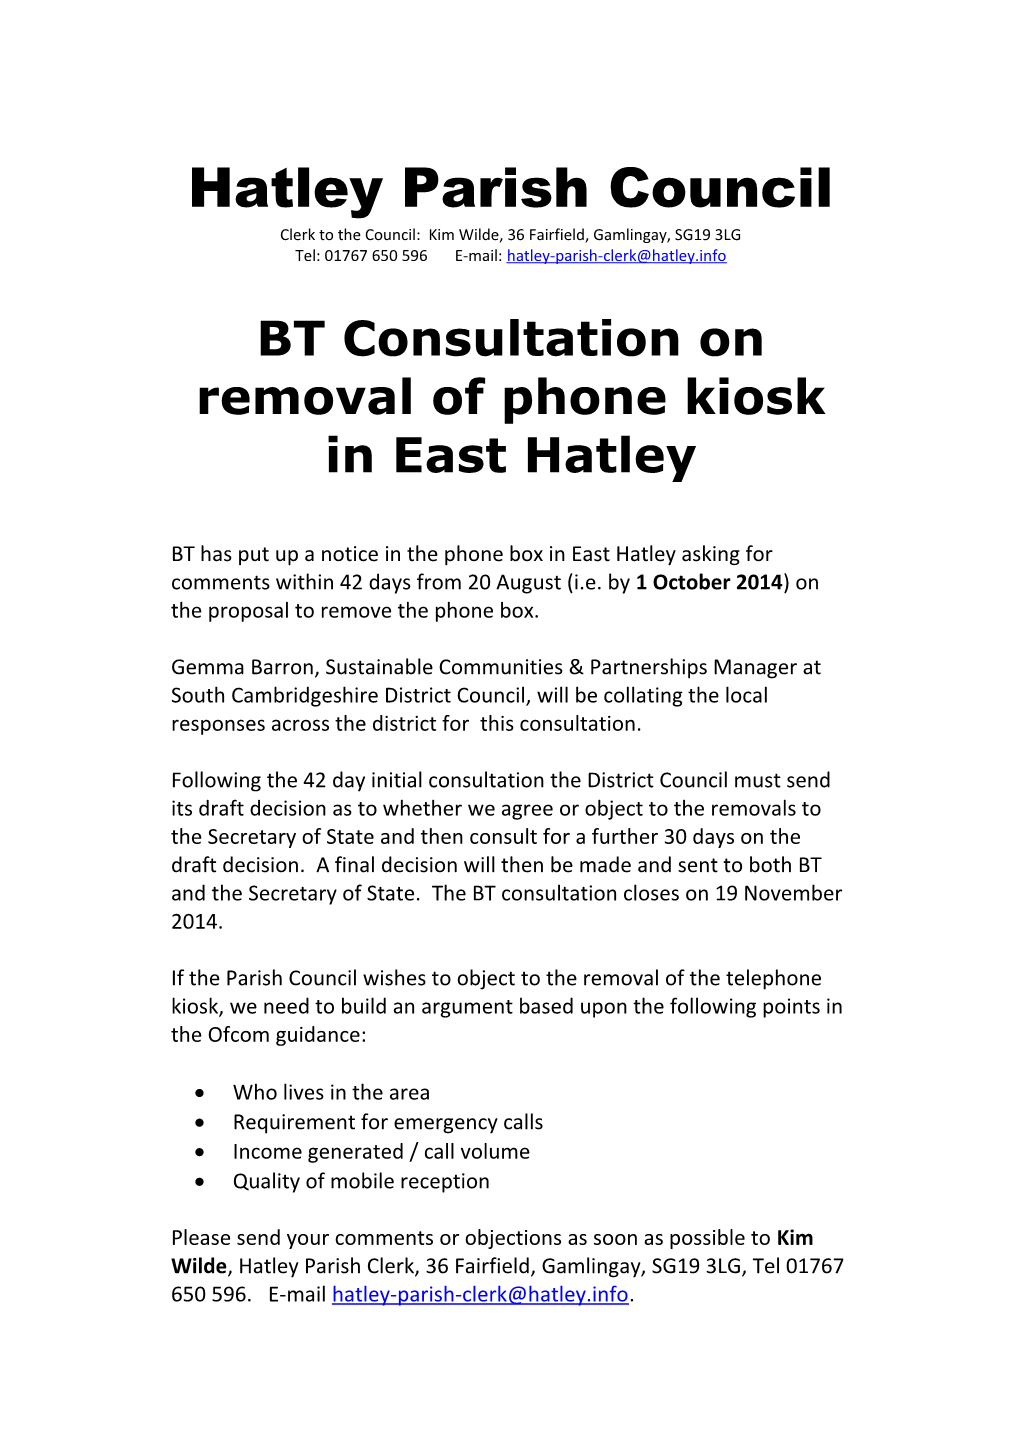 BT Consultation on Removal of Telephone Kiosk in East Hatley